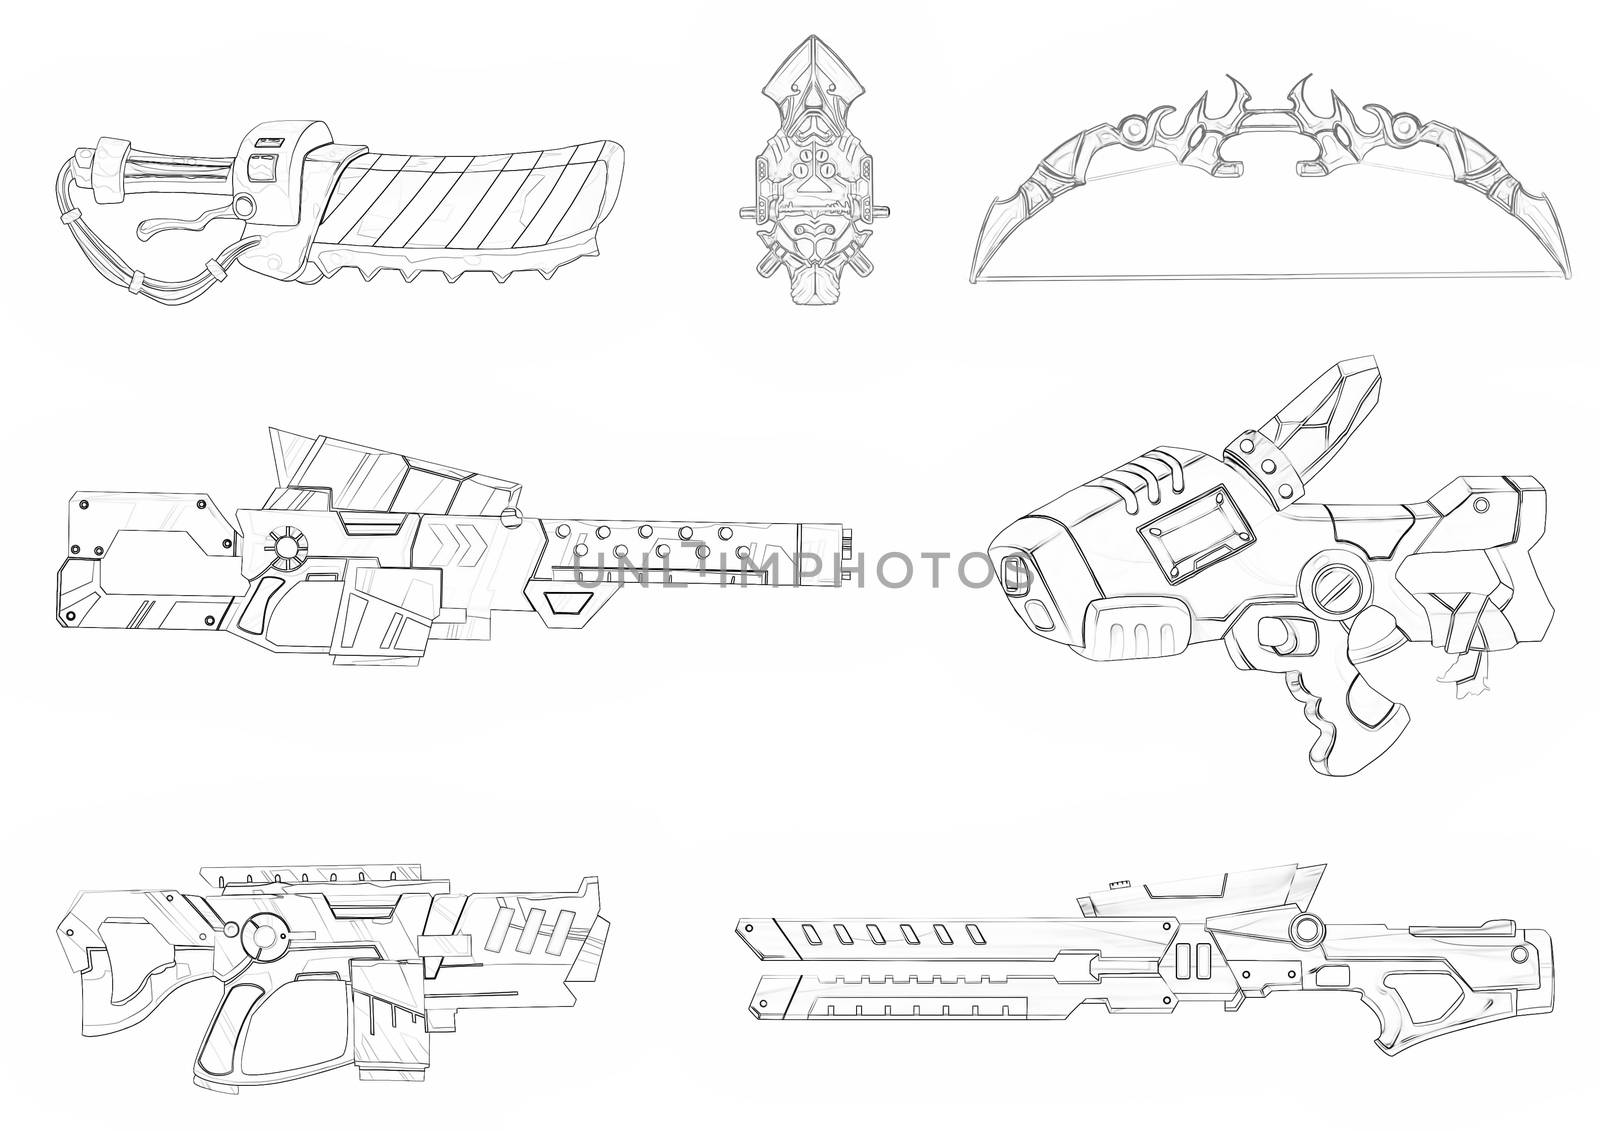 Illustration: Coloring Book Series: Boy's Favorite: Futuristic Weapon Arsenal. Soft thin line. Print it and bring it to Life with Color! Fantastic Outline / Sketch / Line Art Design.